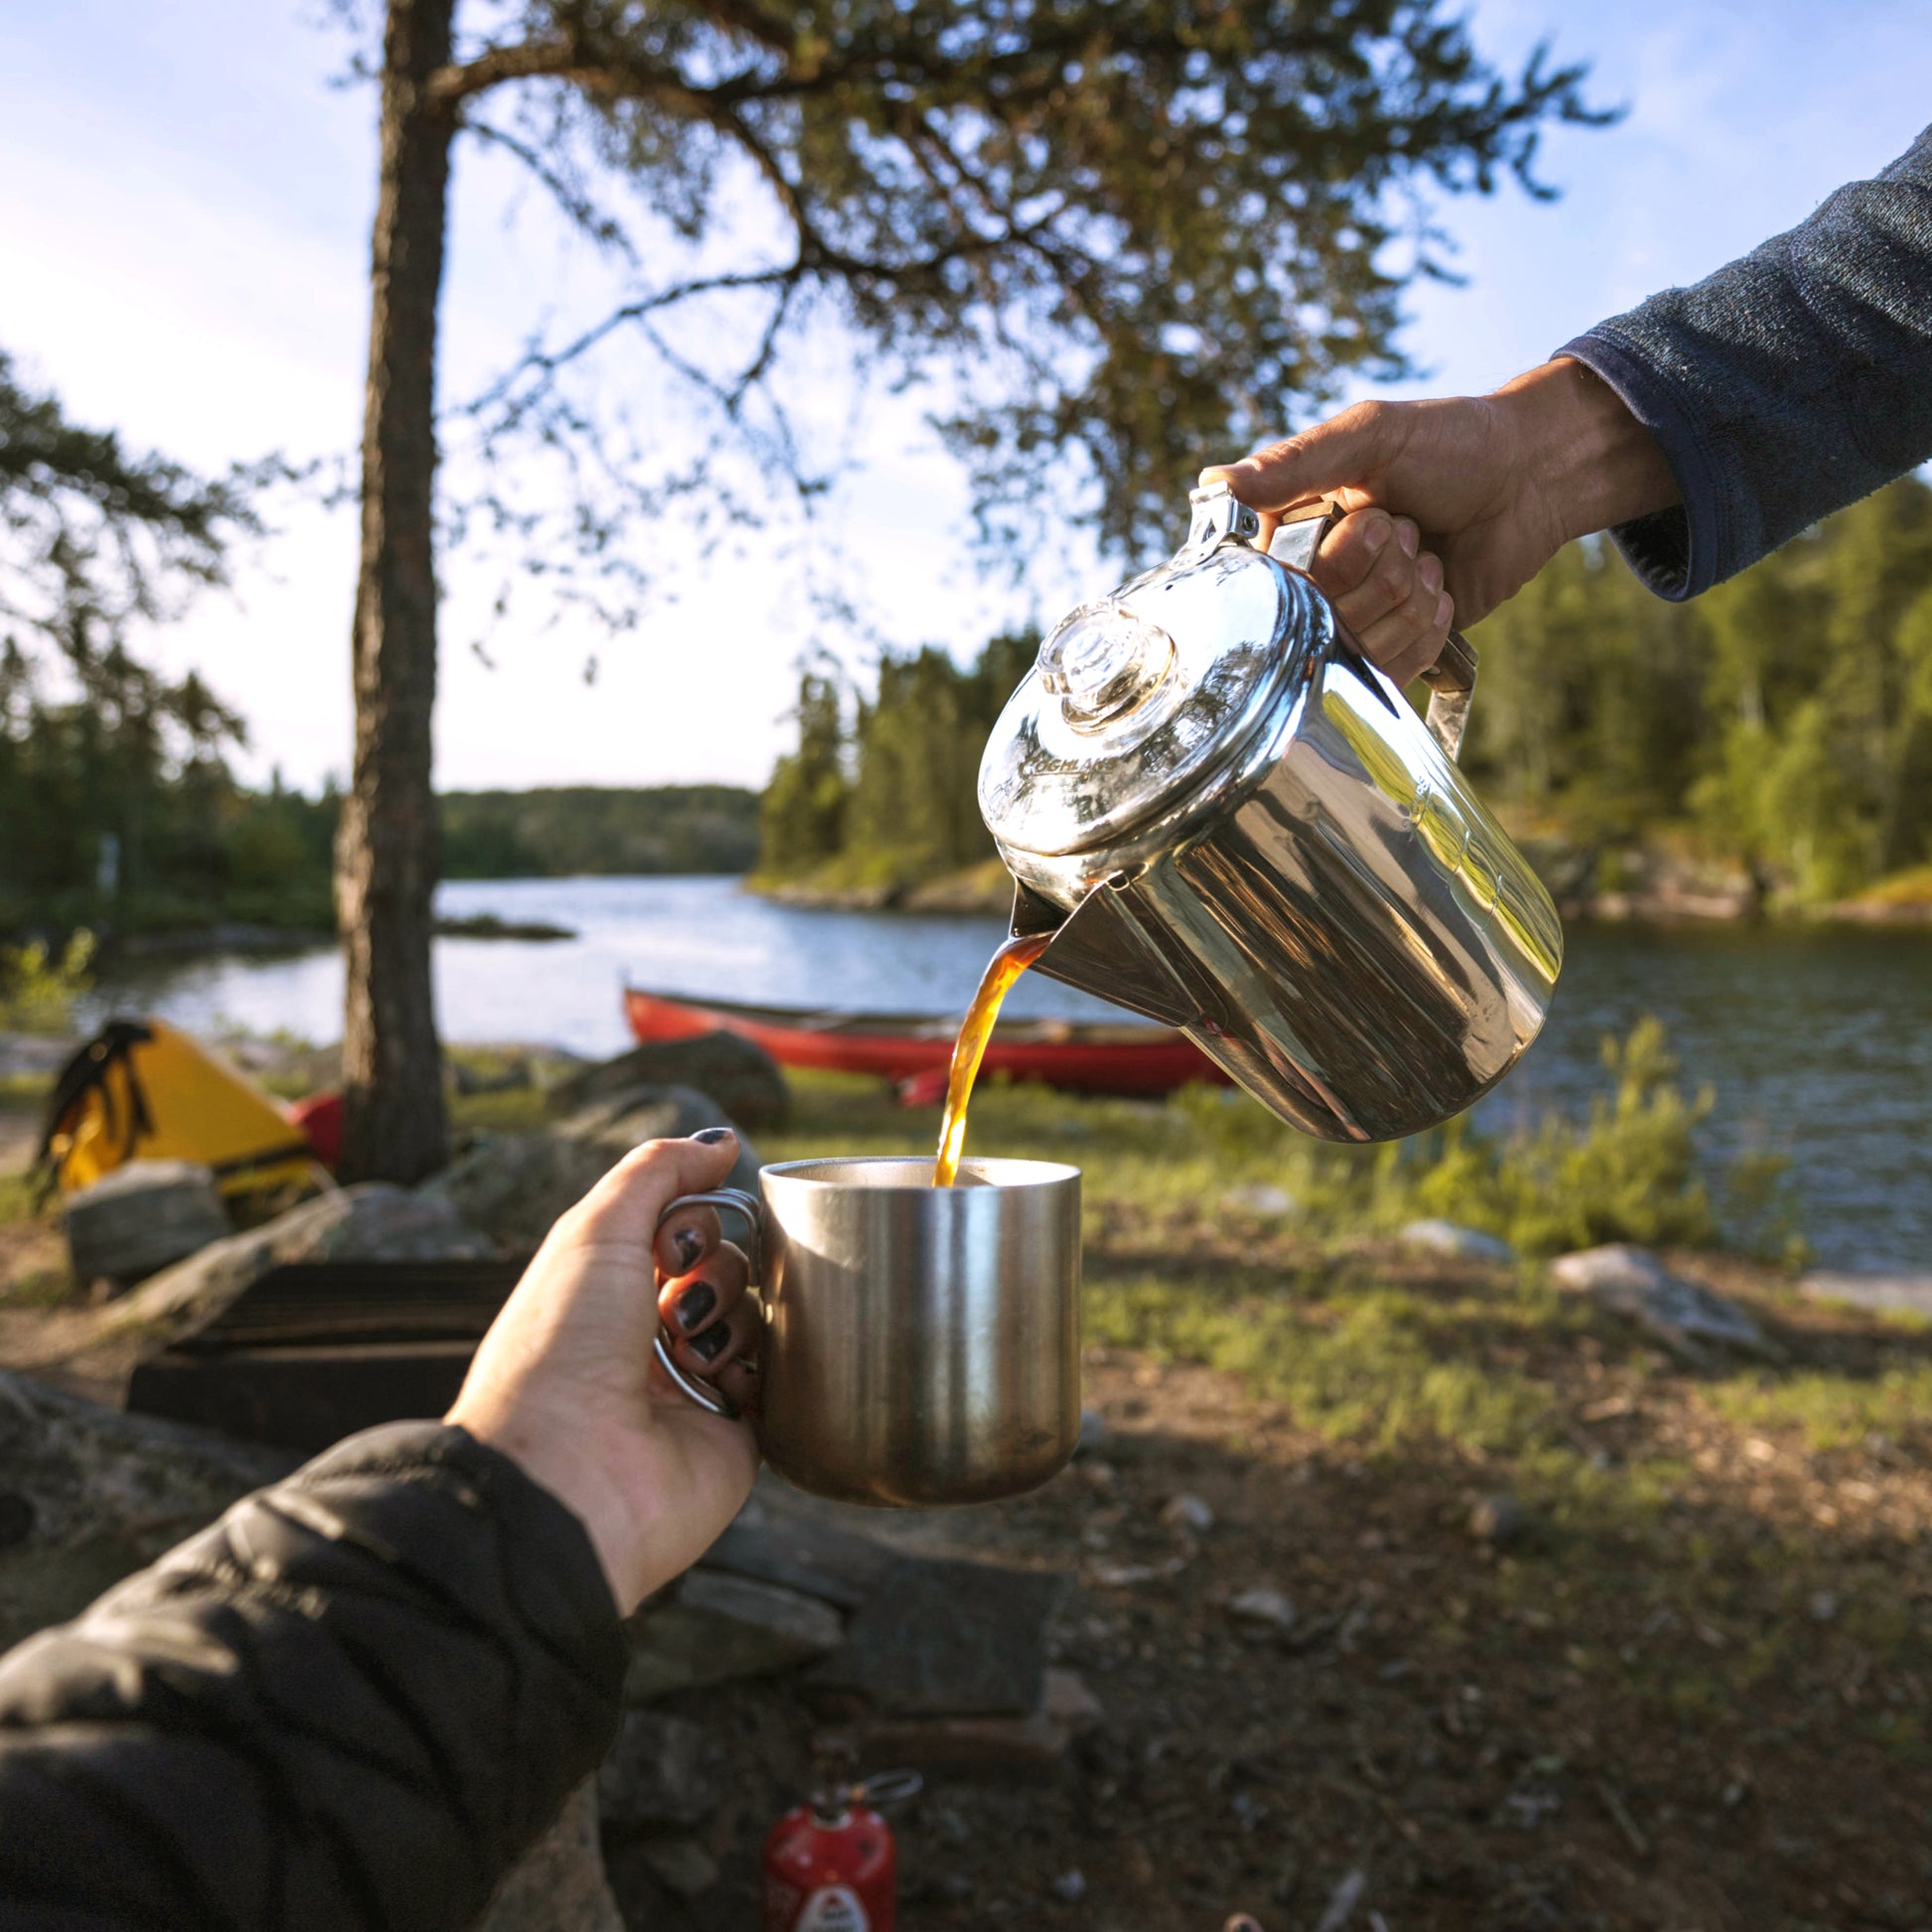 Bozeman Camping Coffee Pot Percolator Coffee Pot Coffee Percolator For  Campfire Or Stovetop Coffee Making, Today's Best Daily Deals